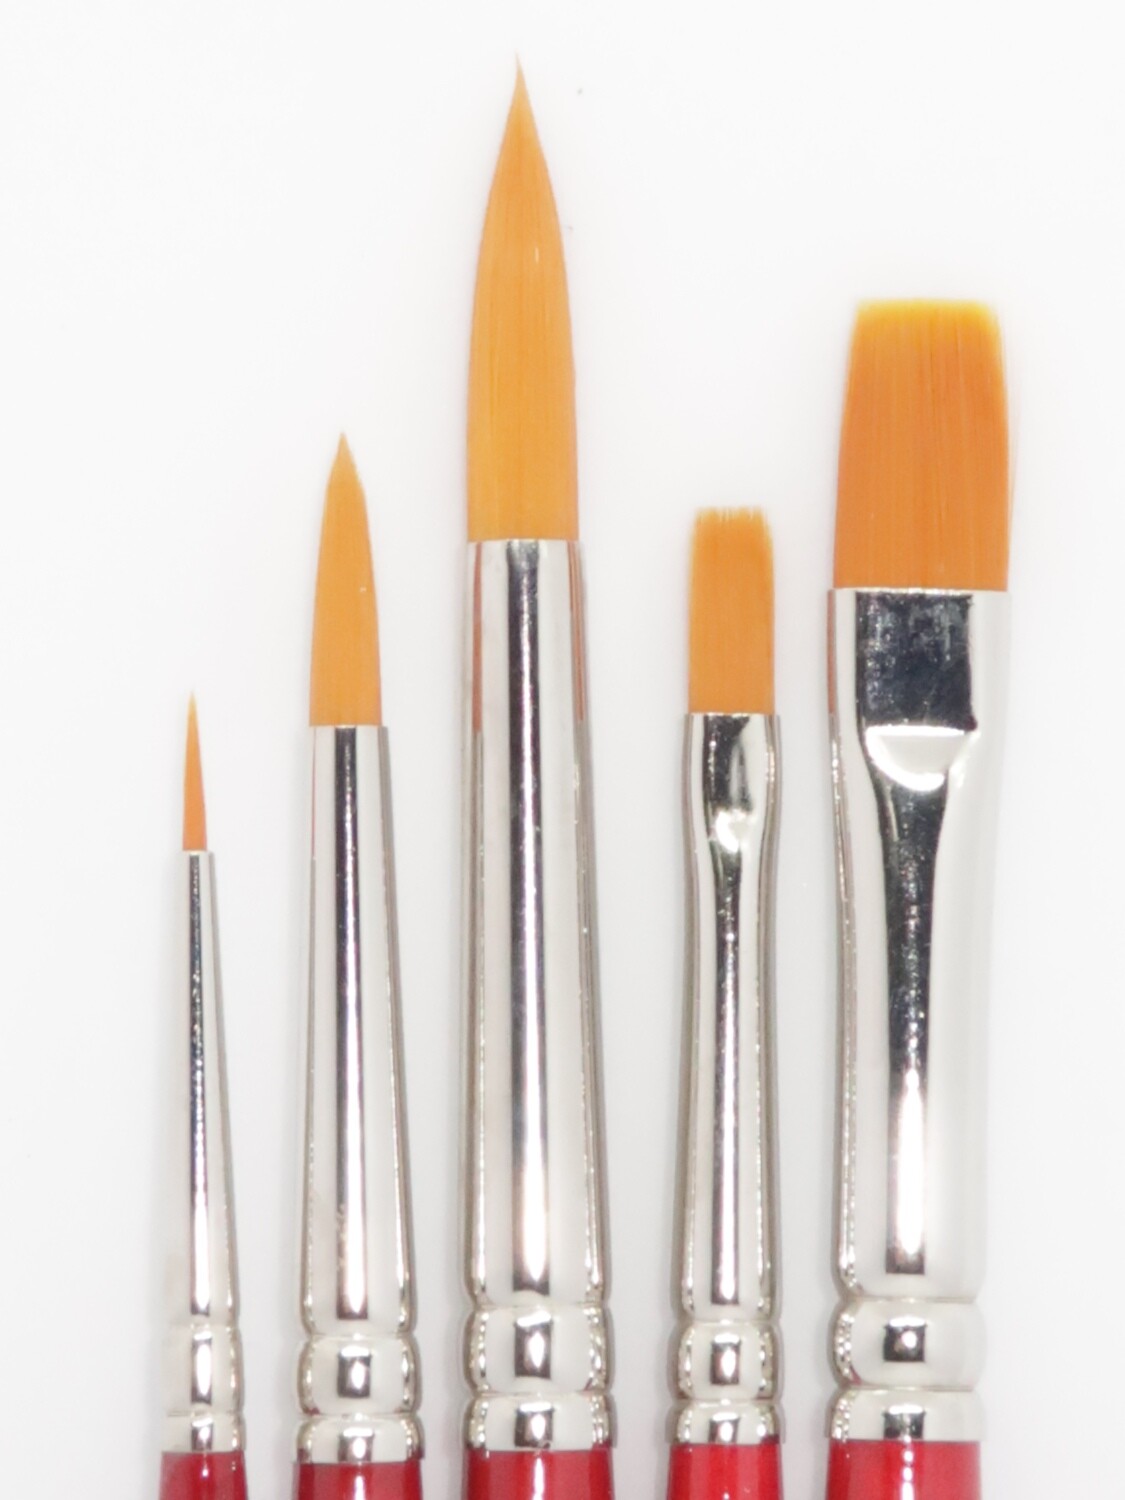 PANART SS-04 Gold Synthetic Brushes set of 5